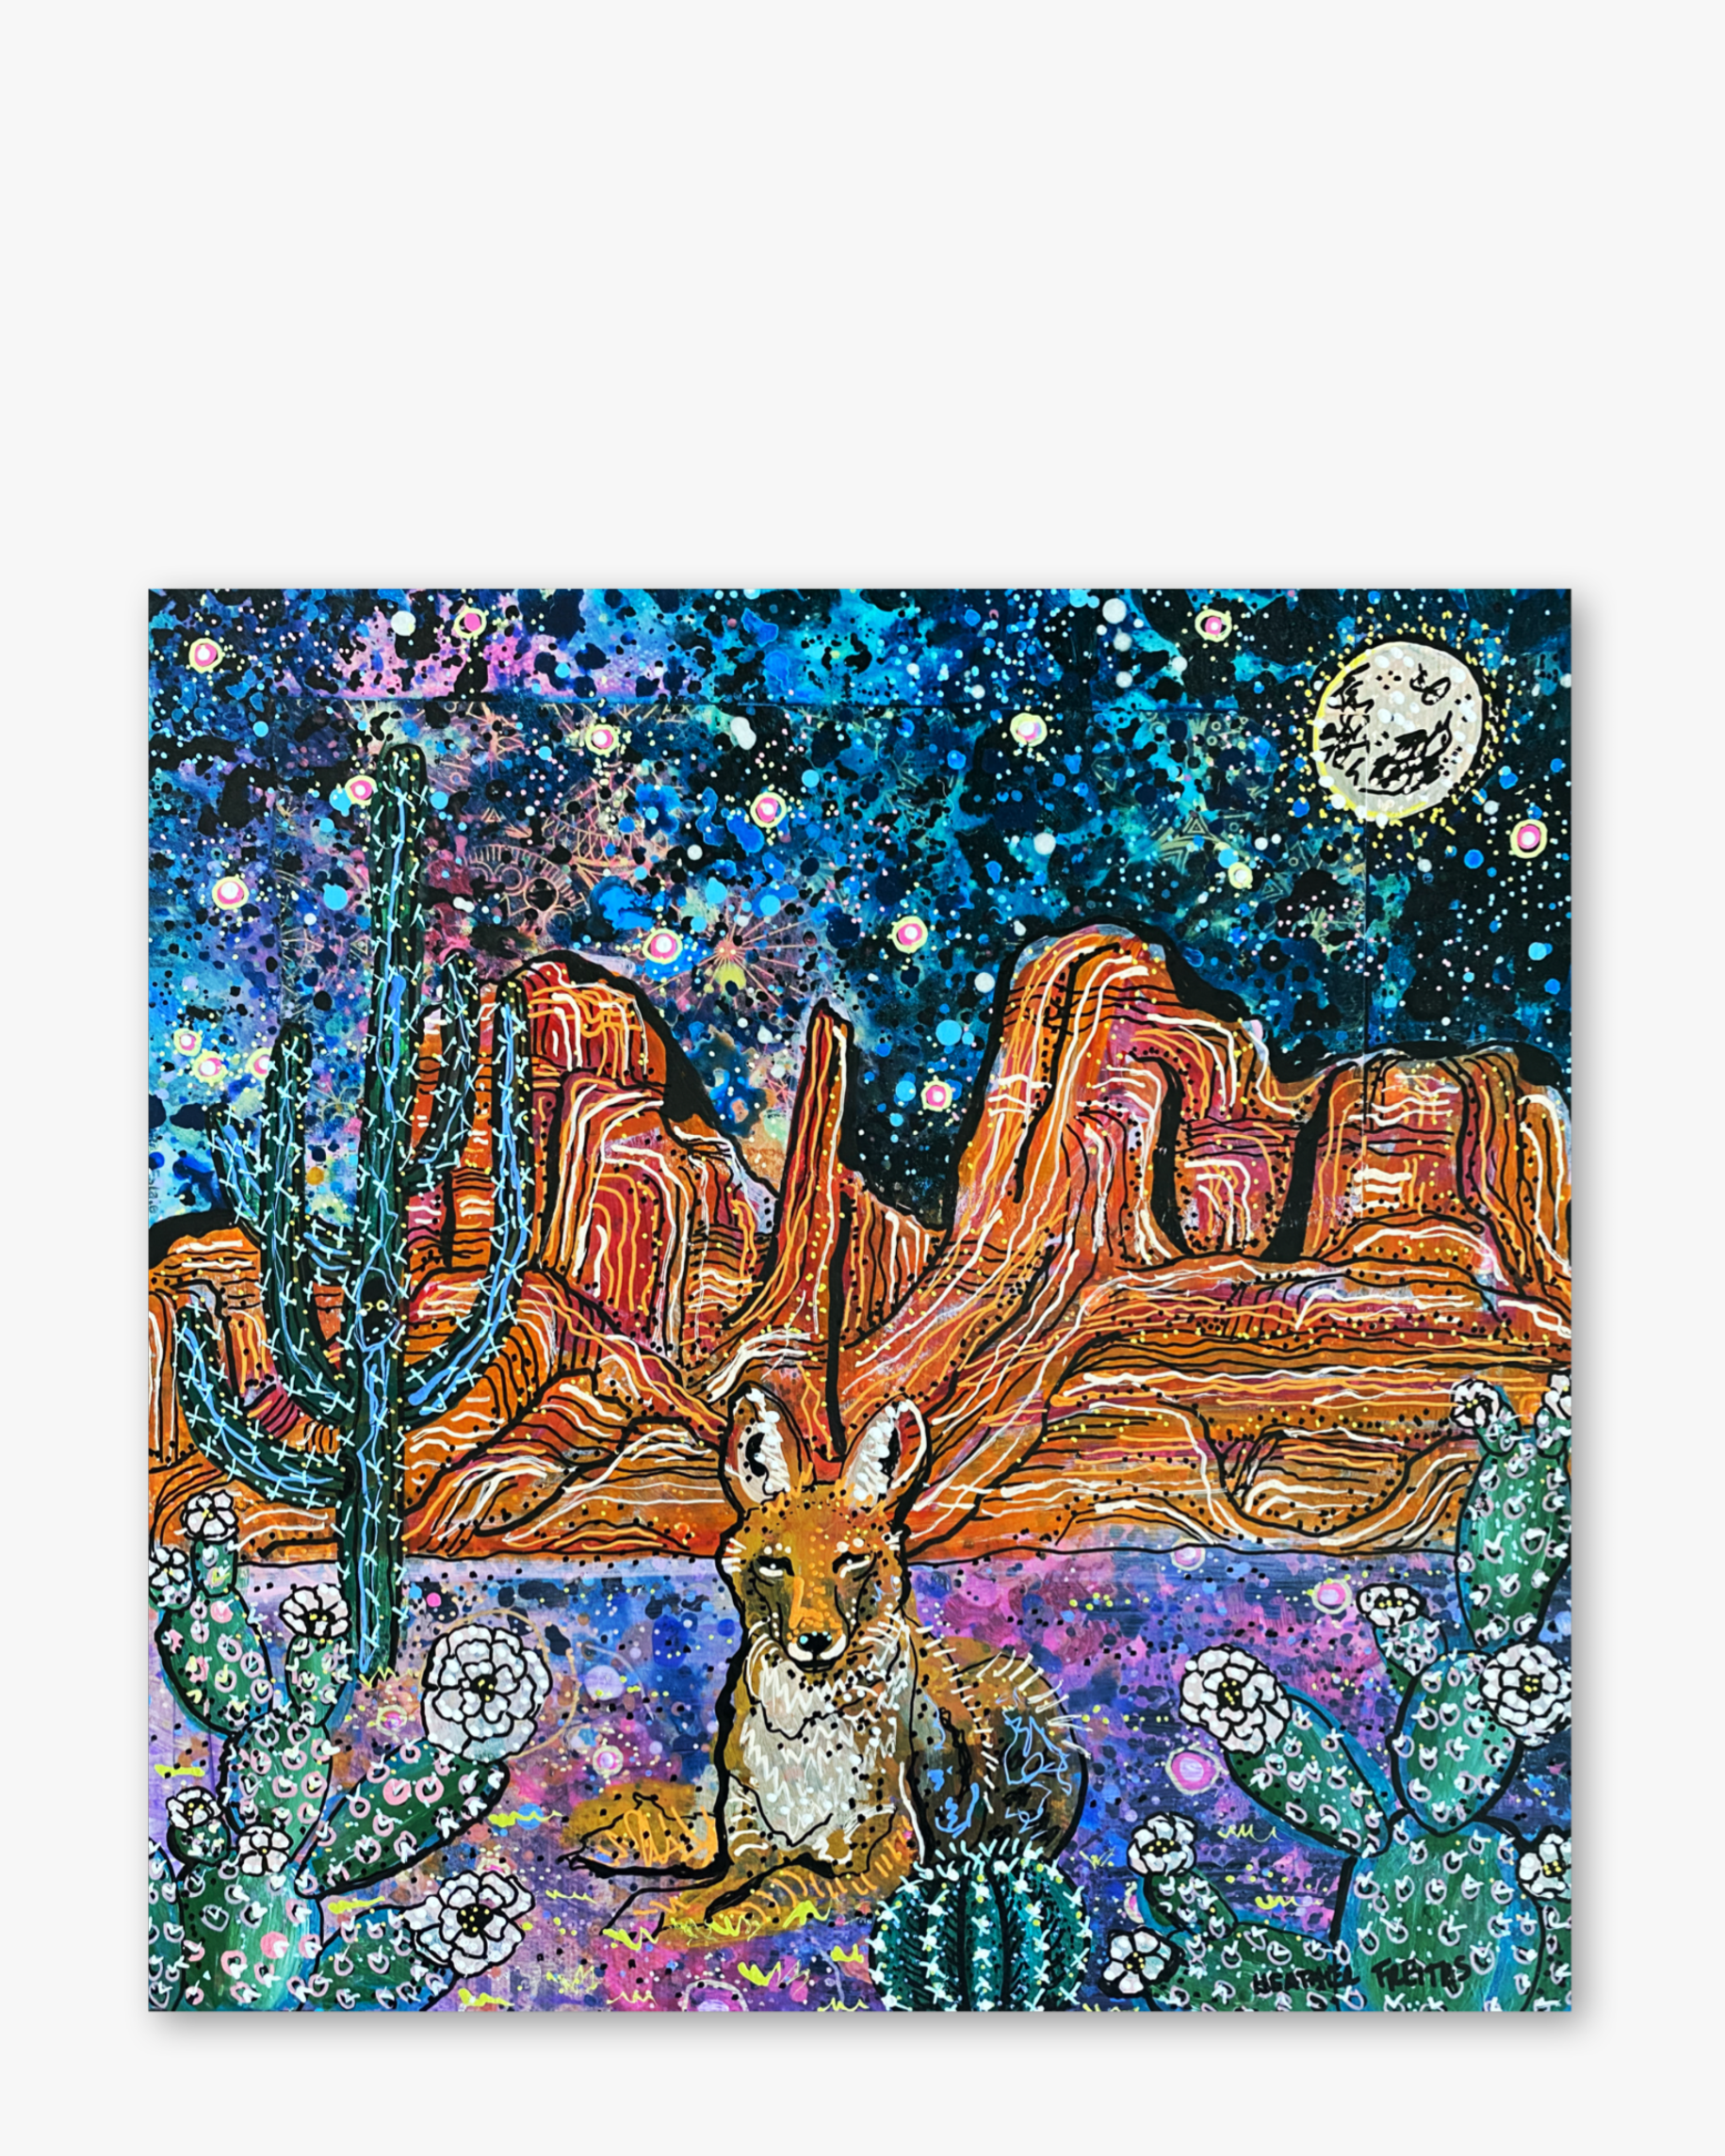 Coyote Song( Original Painting )